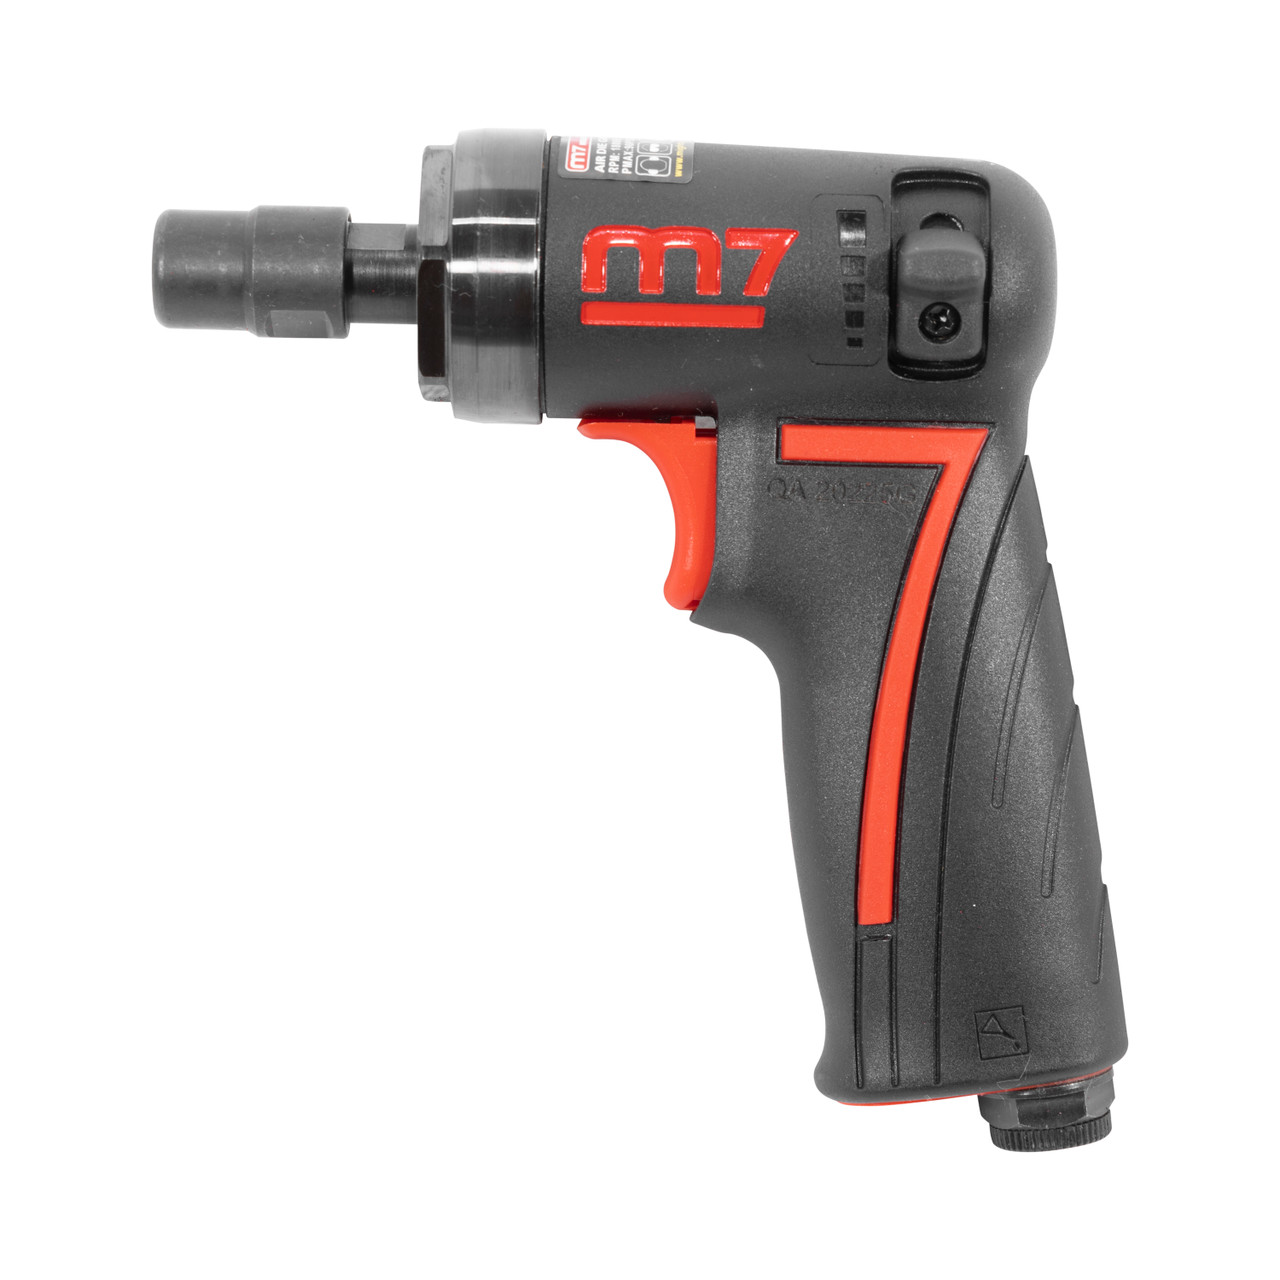 AIRCAT 6255 Professional Series Red Composite Angle Die Grinder With Angled Gear Mechanism by AirCat - 4